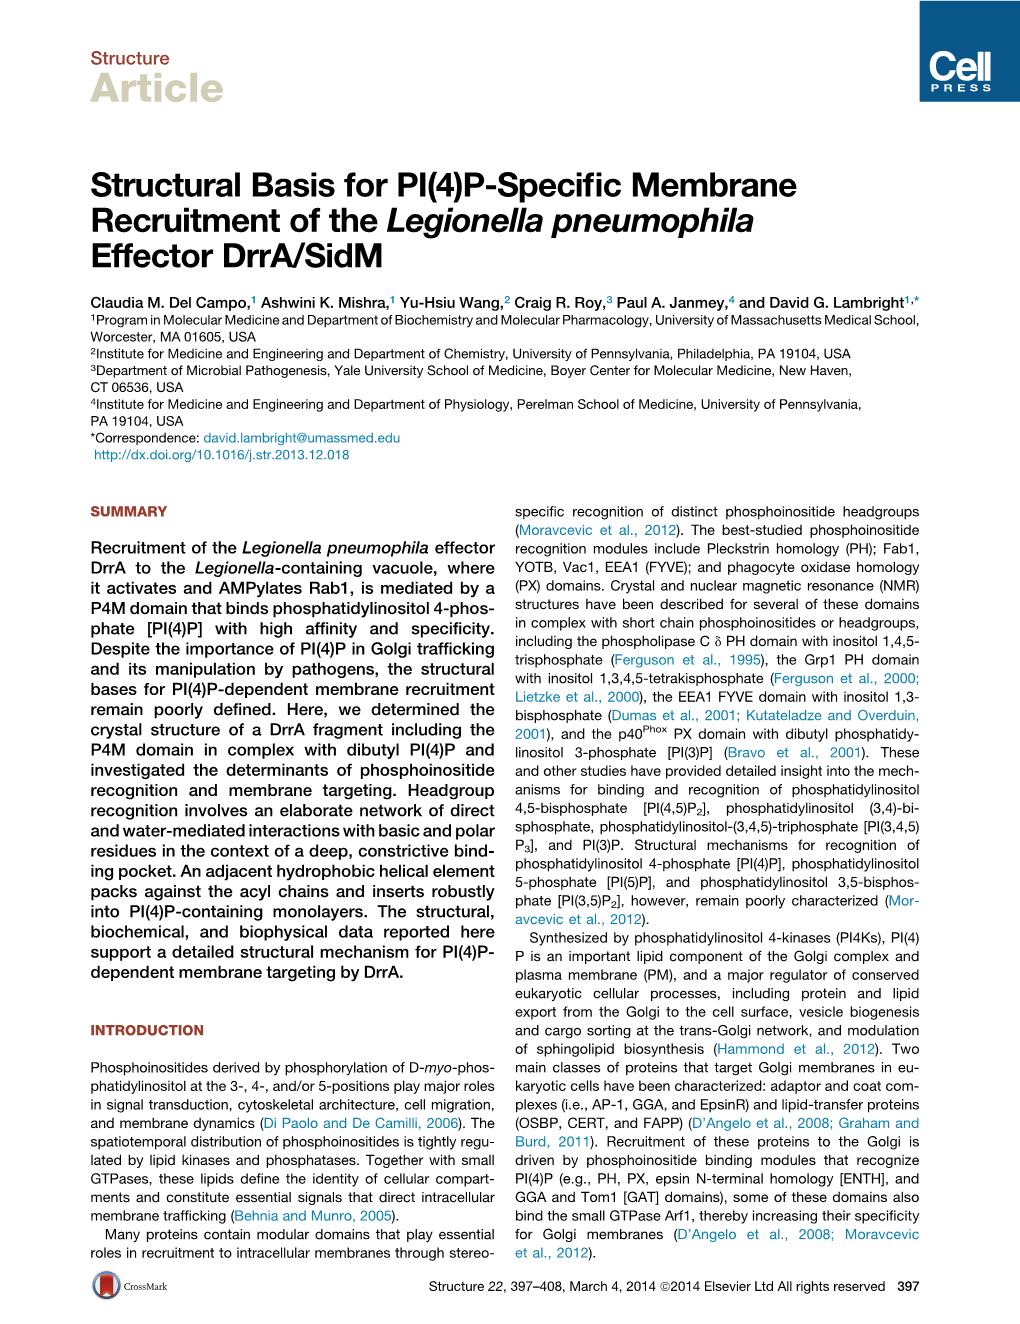 Structural Basis for PI(4)P-Specific Membrane Recruitment of The